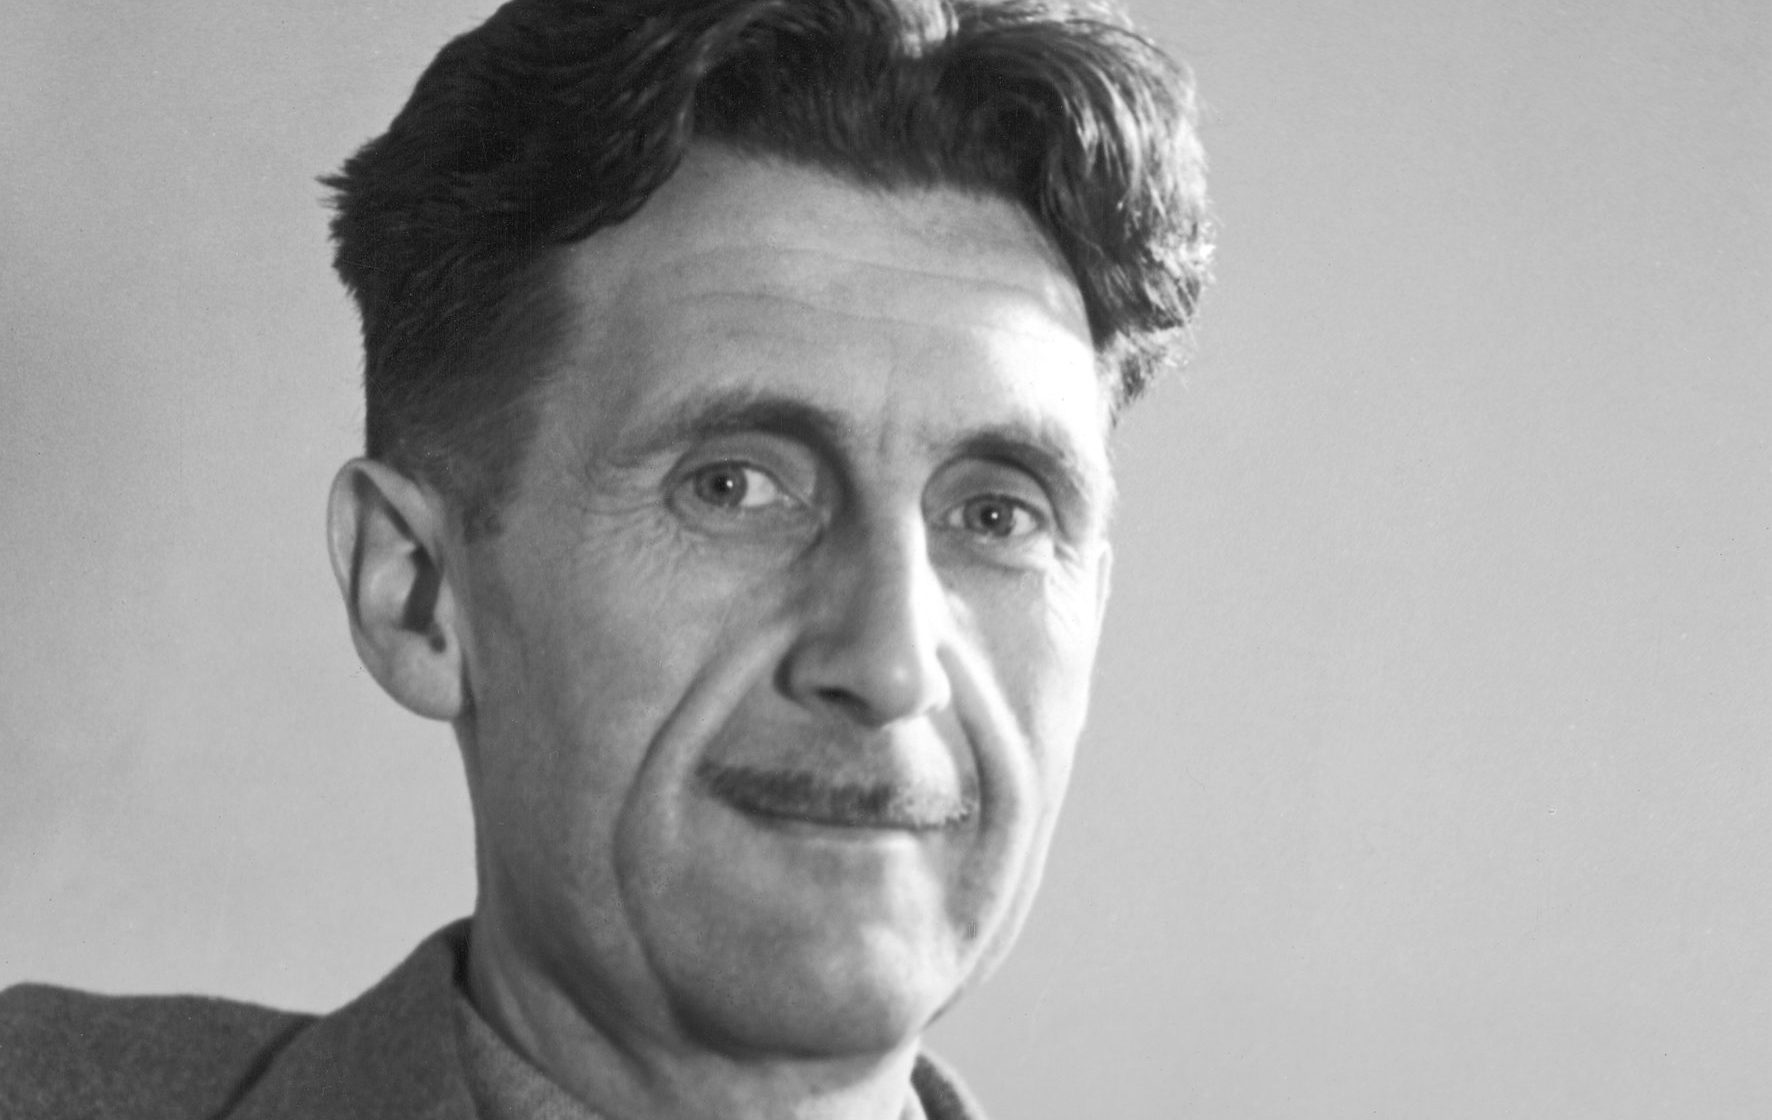 Eric Arthur Blair (25 June 1903 Ð 21 January 1950), better known by his pen name George Orwell, was an influential English author and journalist, c. 1940